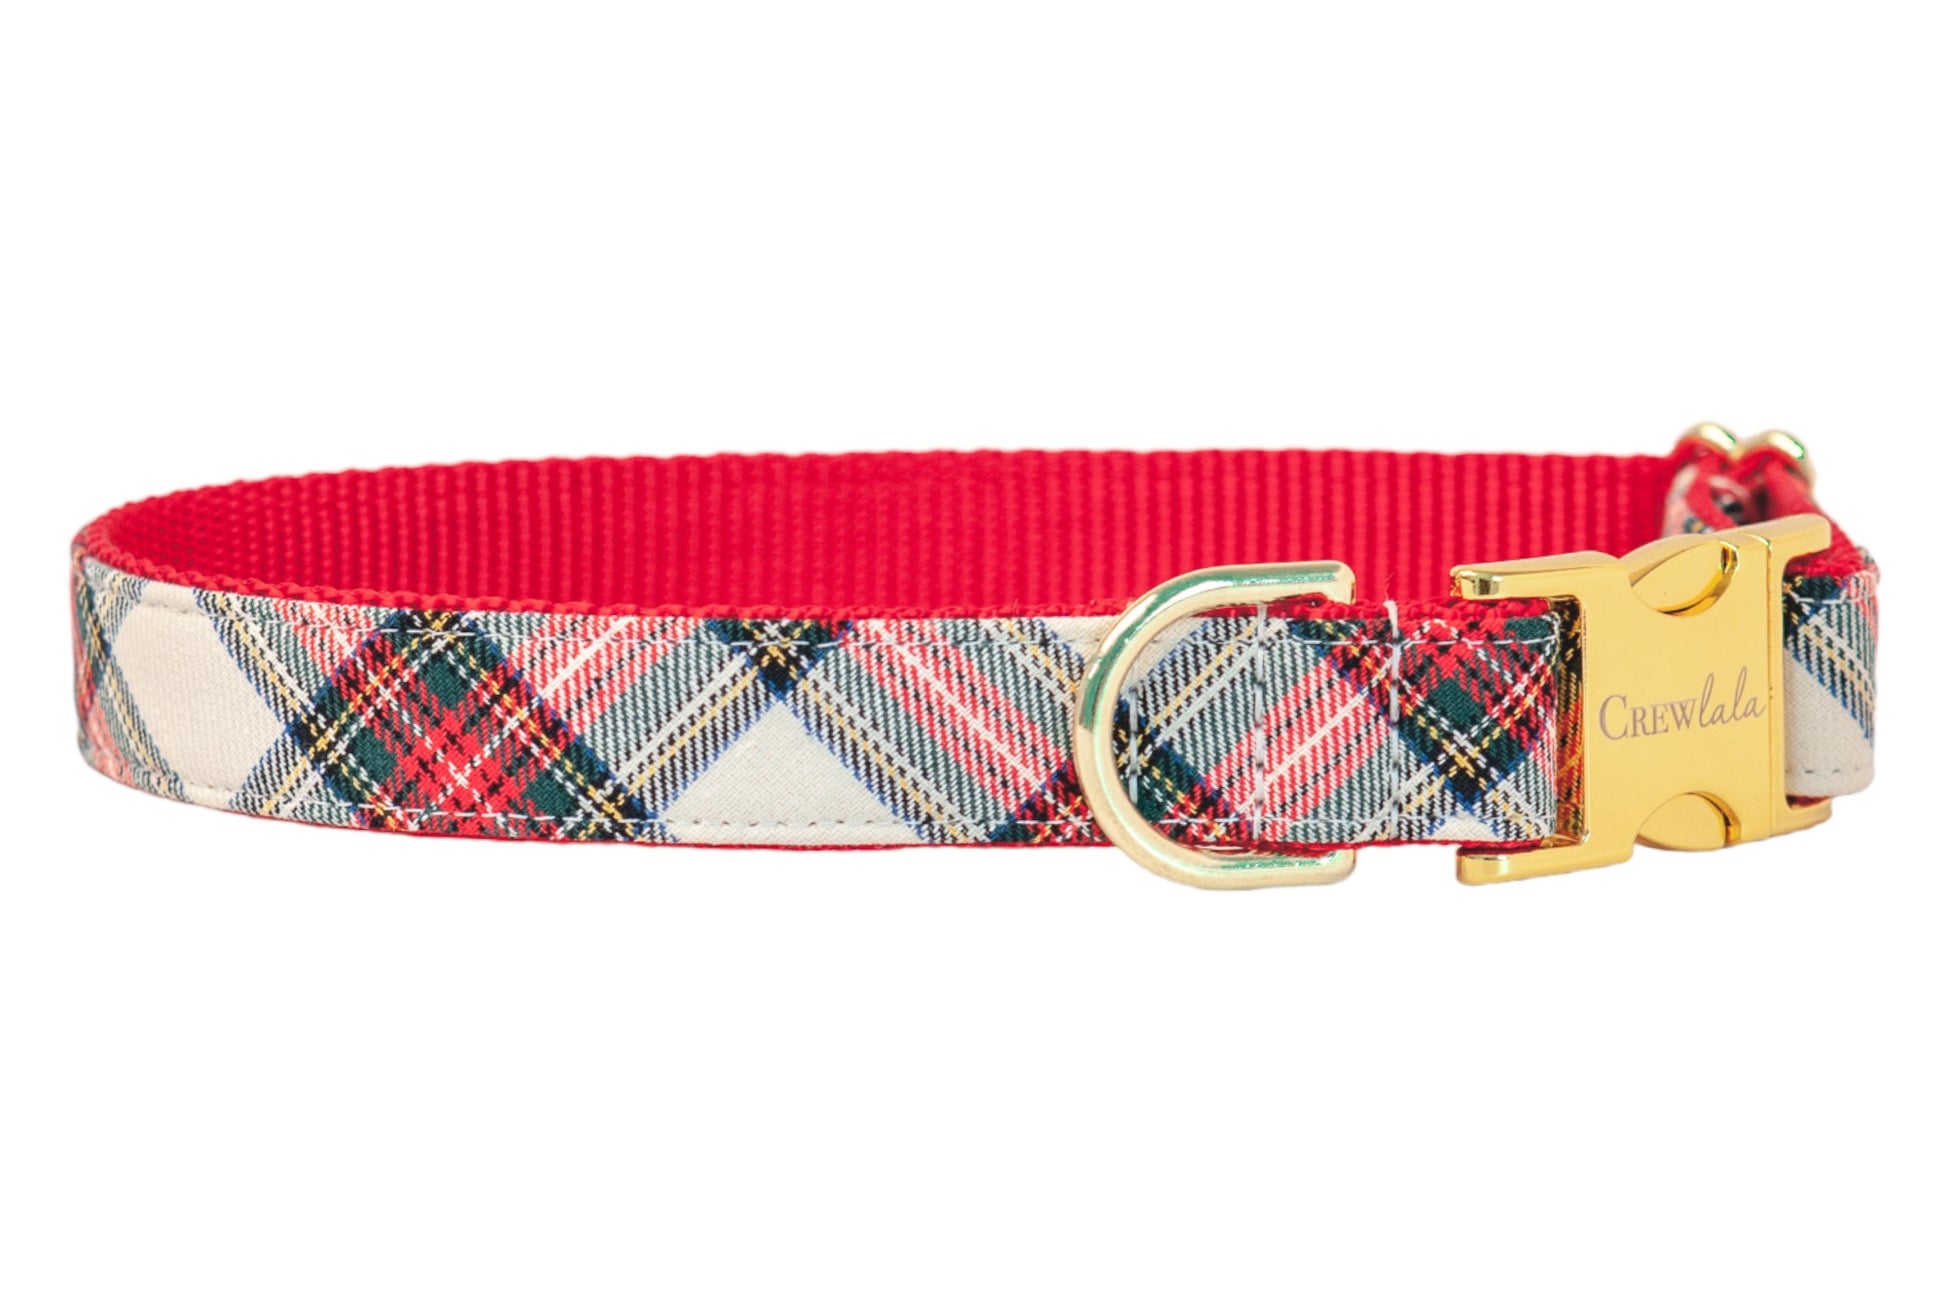 Ellie's Plaid Belle Bow Dog Collar- Two Styles! - Crew LaLa